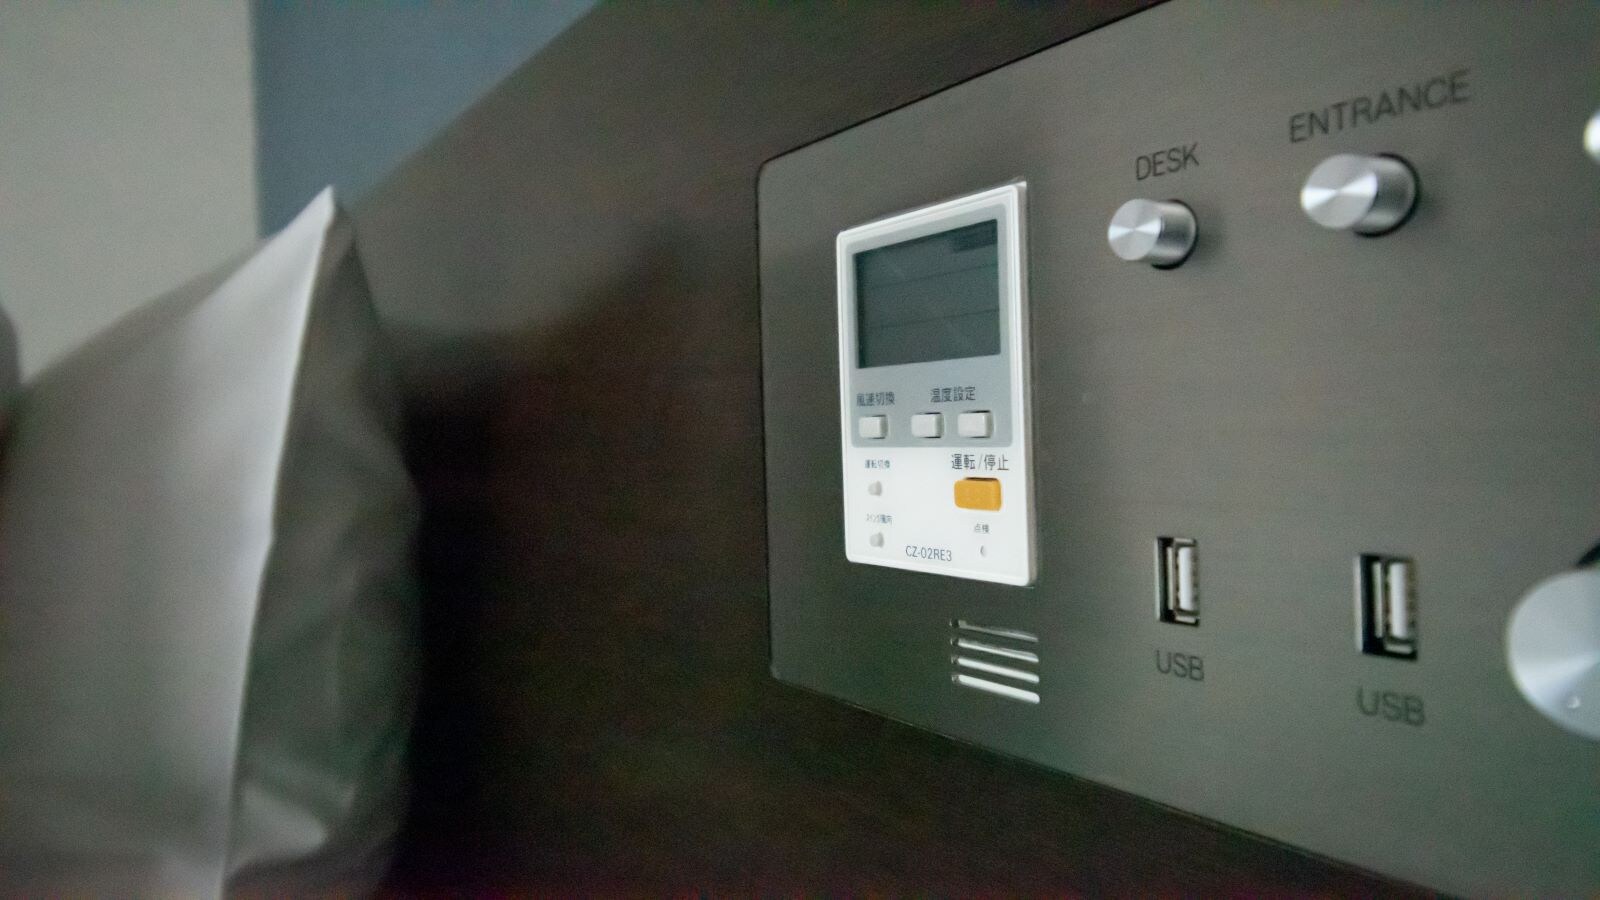 There is also a USB port above the bed ♪